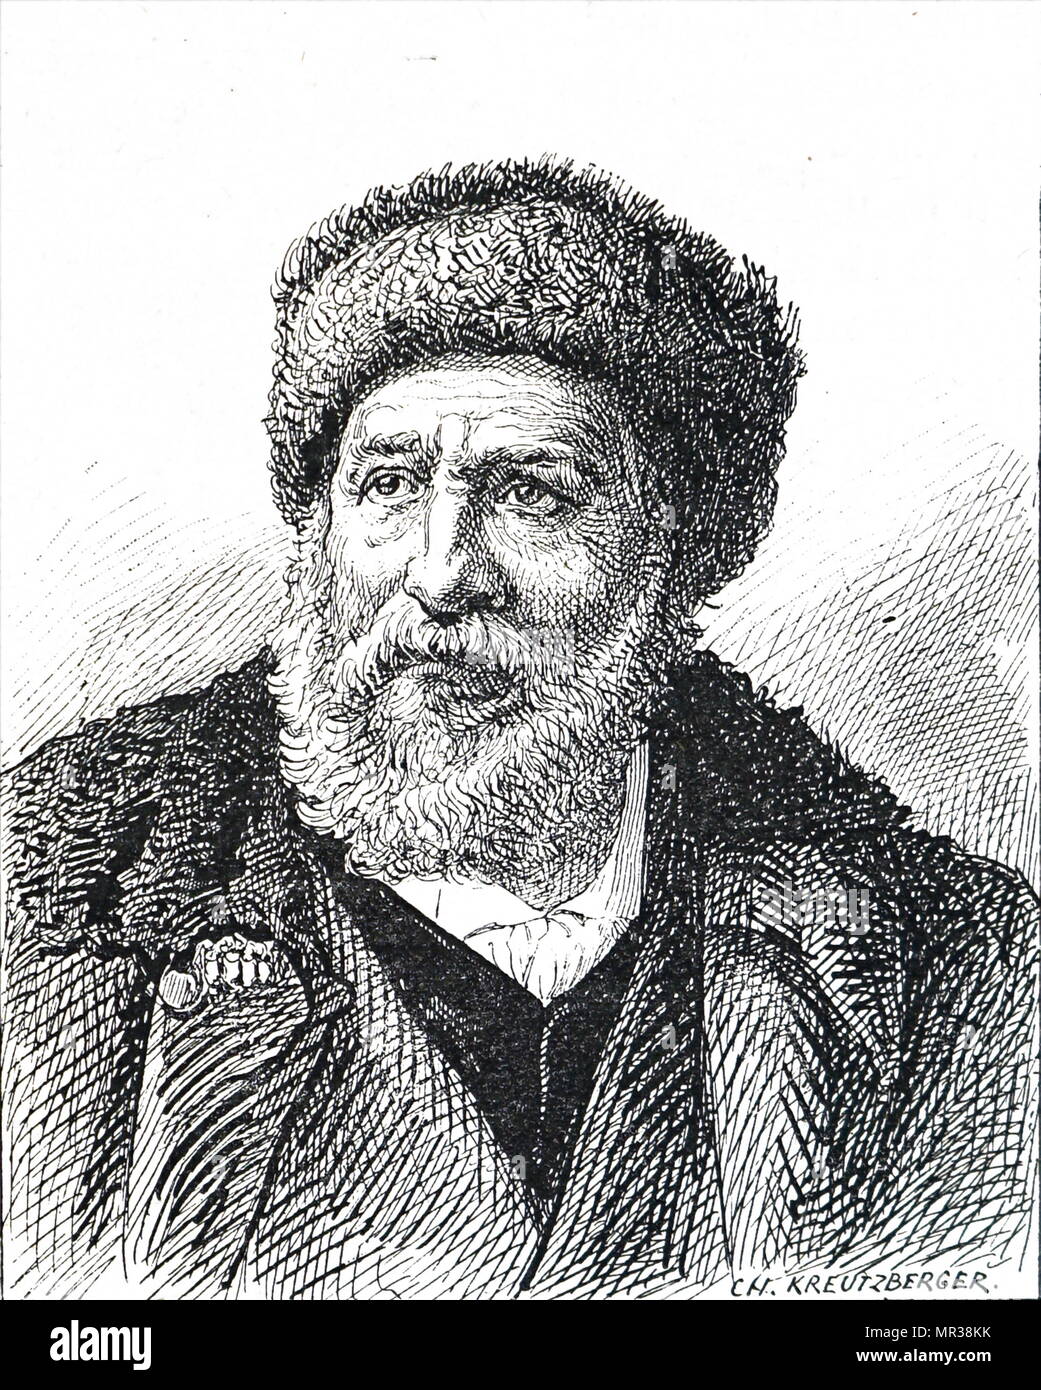 Portrait of Élisée Reclus (1830-1905) a renowned French geographer, writer, and anarchist. Dated 19th century Stock Photo